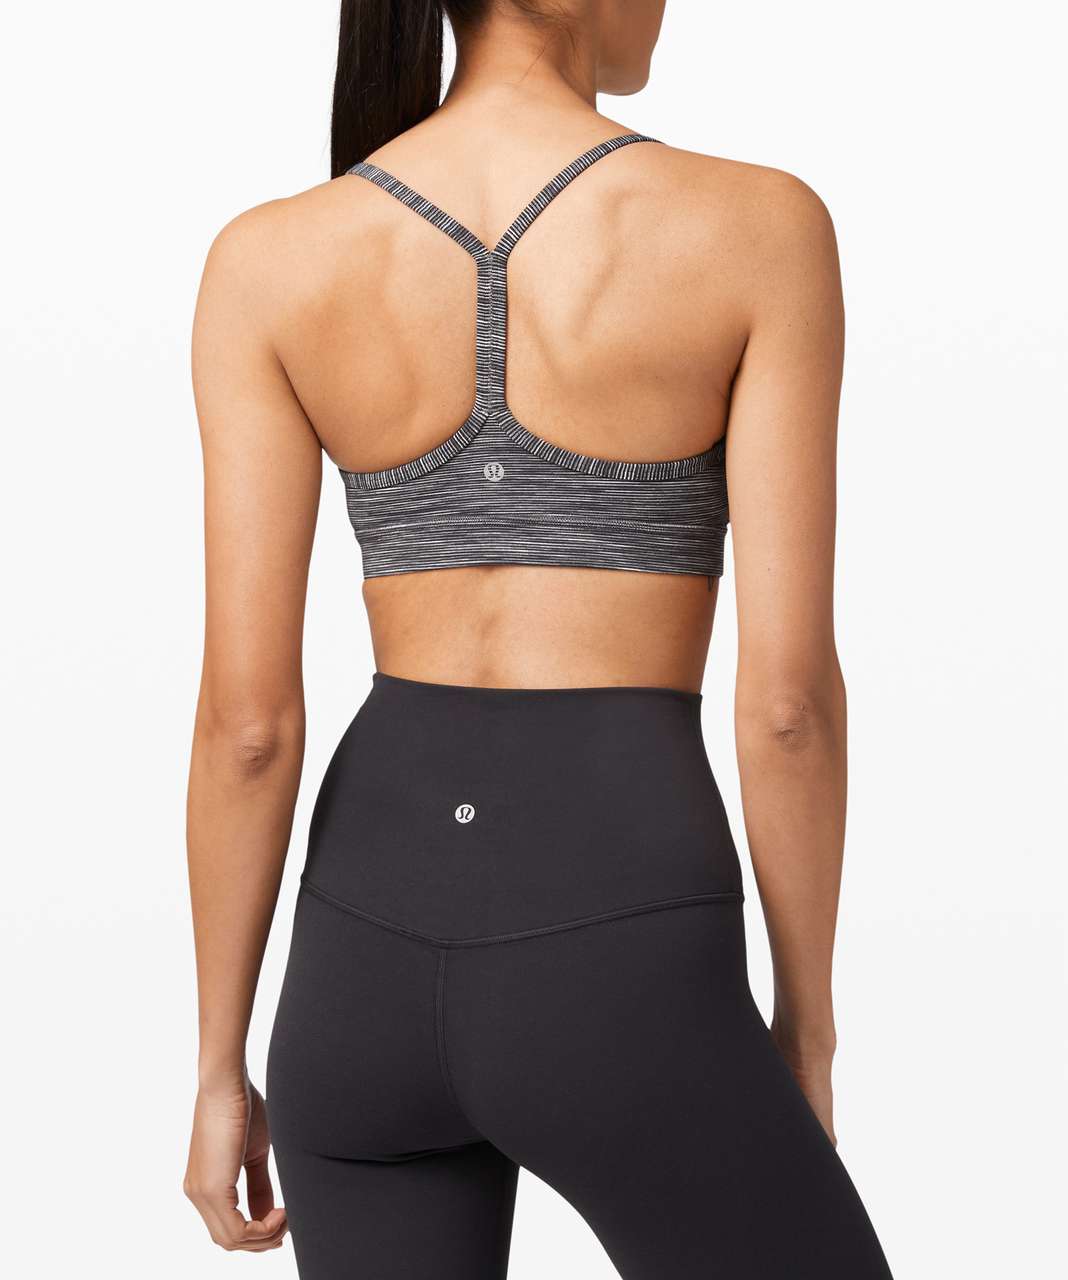 Lululemon Flow Y Bra Nulu *Light Support, B/C Cup - Wee Are From Space Dark Carbon Ice Grey